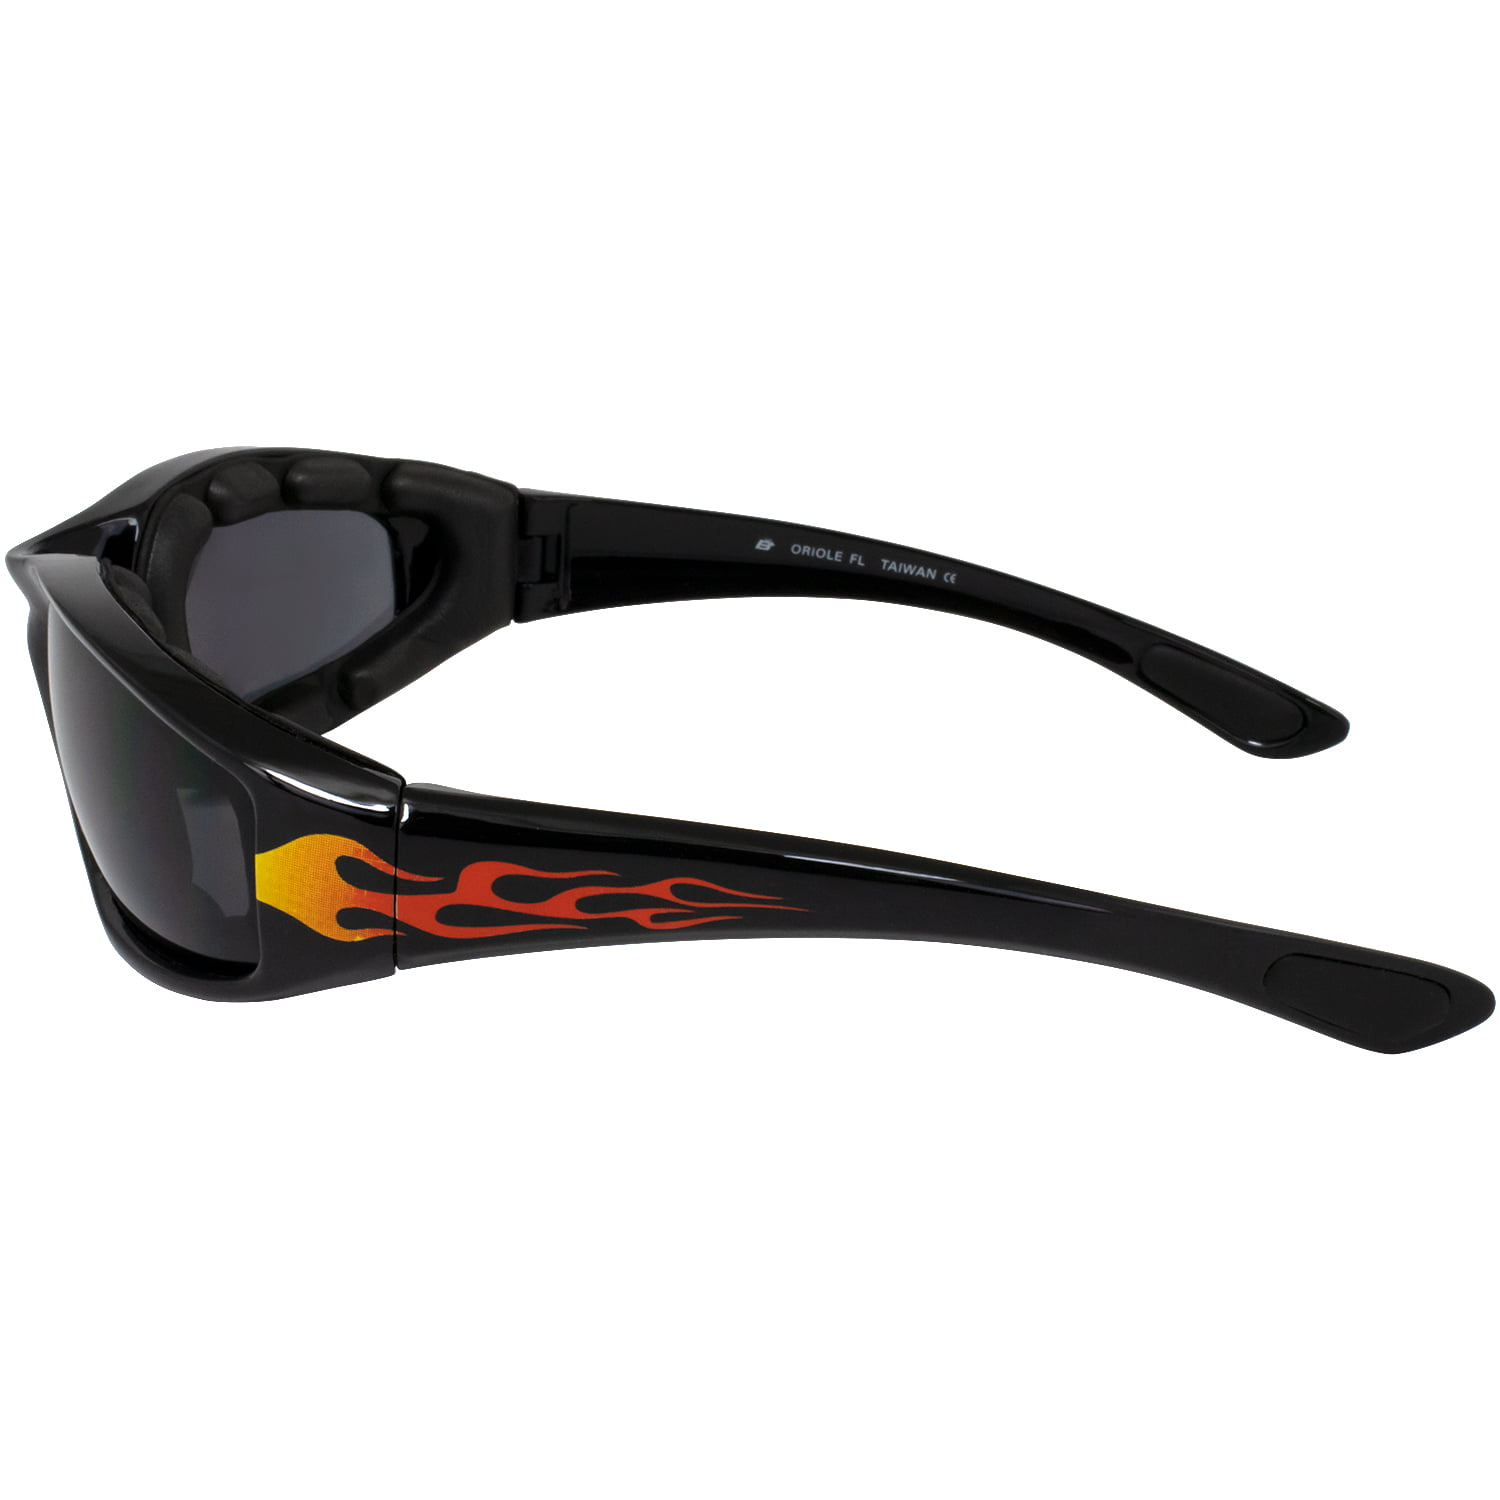 lenses that are shatter resistant polycarbonate 3 Motorcycle Flame Sunglasses Glasses Padded Black frames with Fire on sides rated UV400 Anti-Fog coated each lens Clear Smoked Yellow Each comes with a soft micro-fiber bag to store them in Also has comfor 